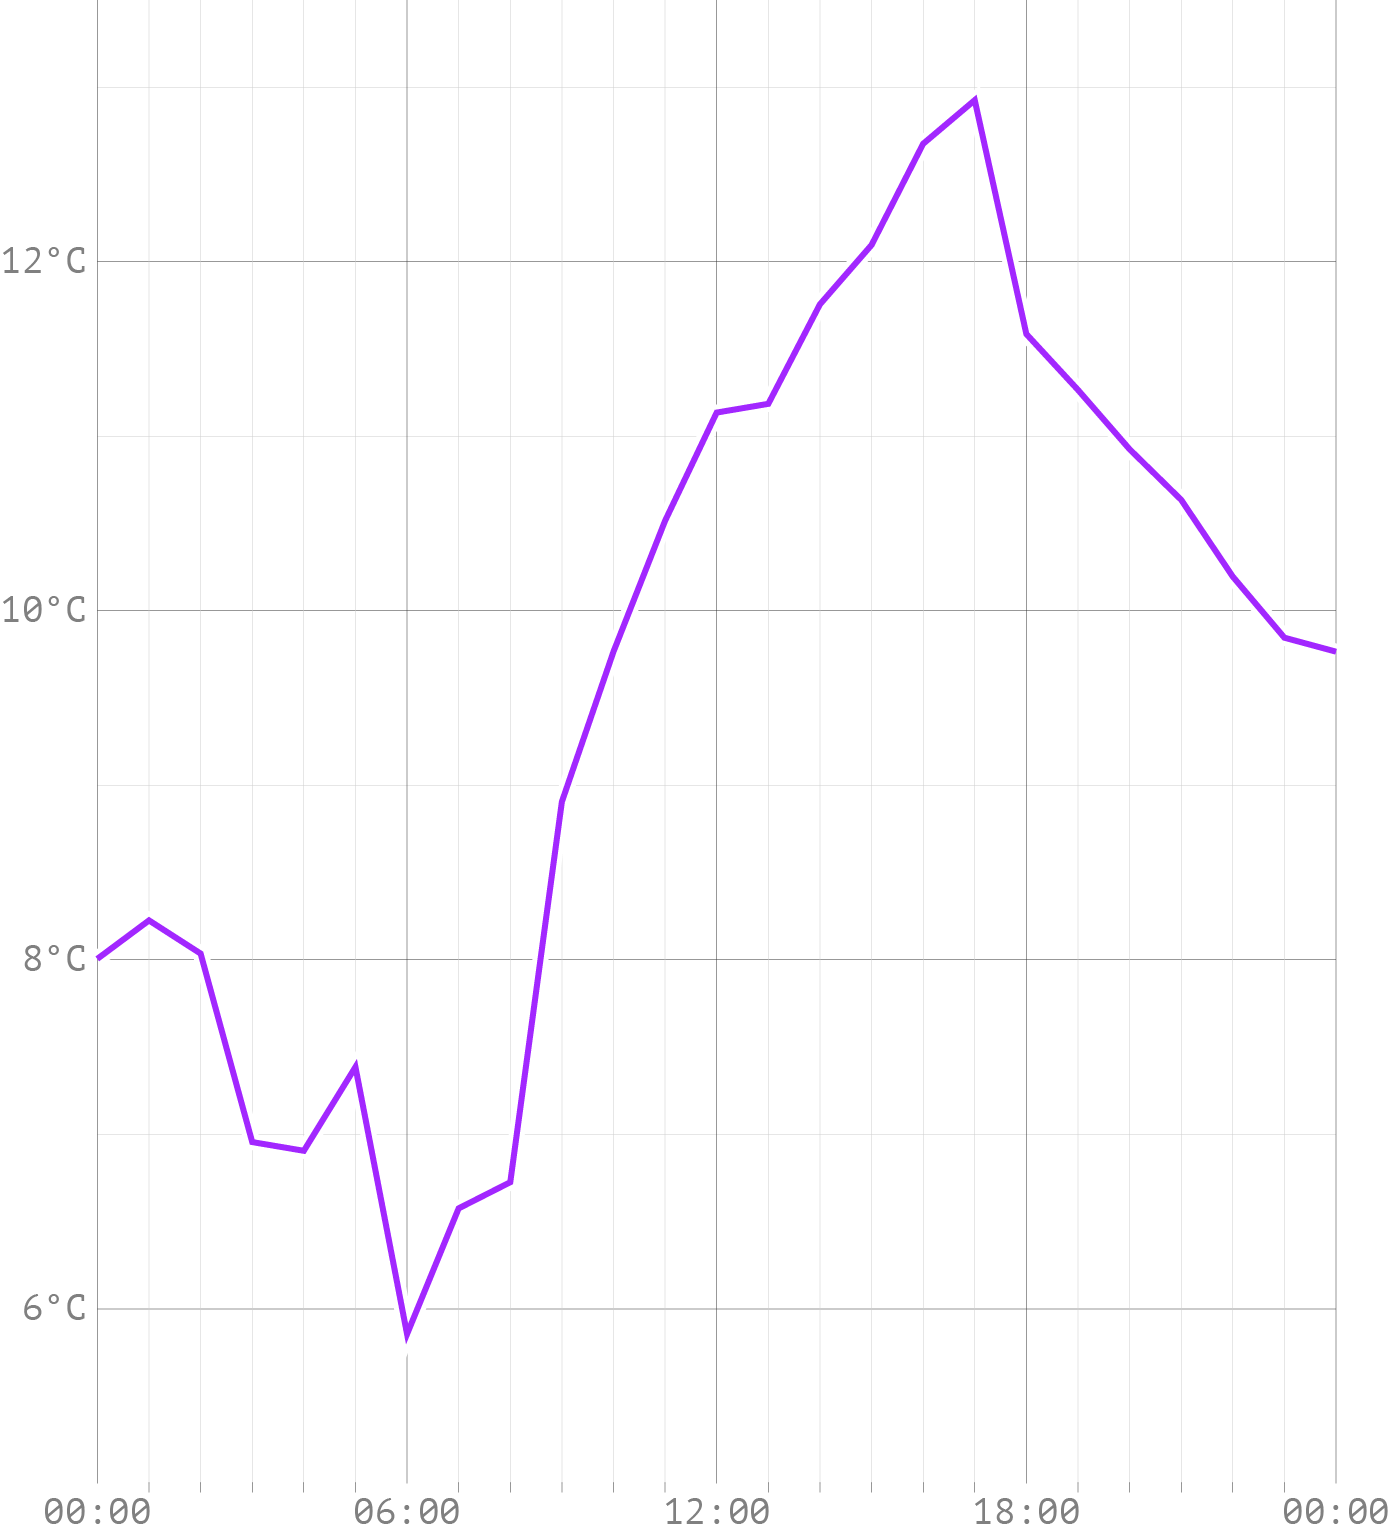 A line chart showing temperature measurements over the course of 24 hour